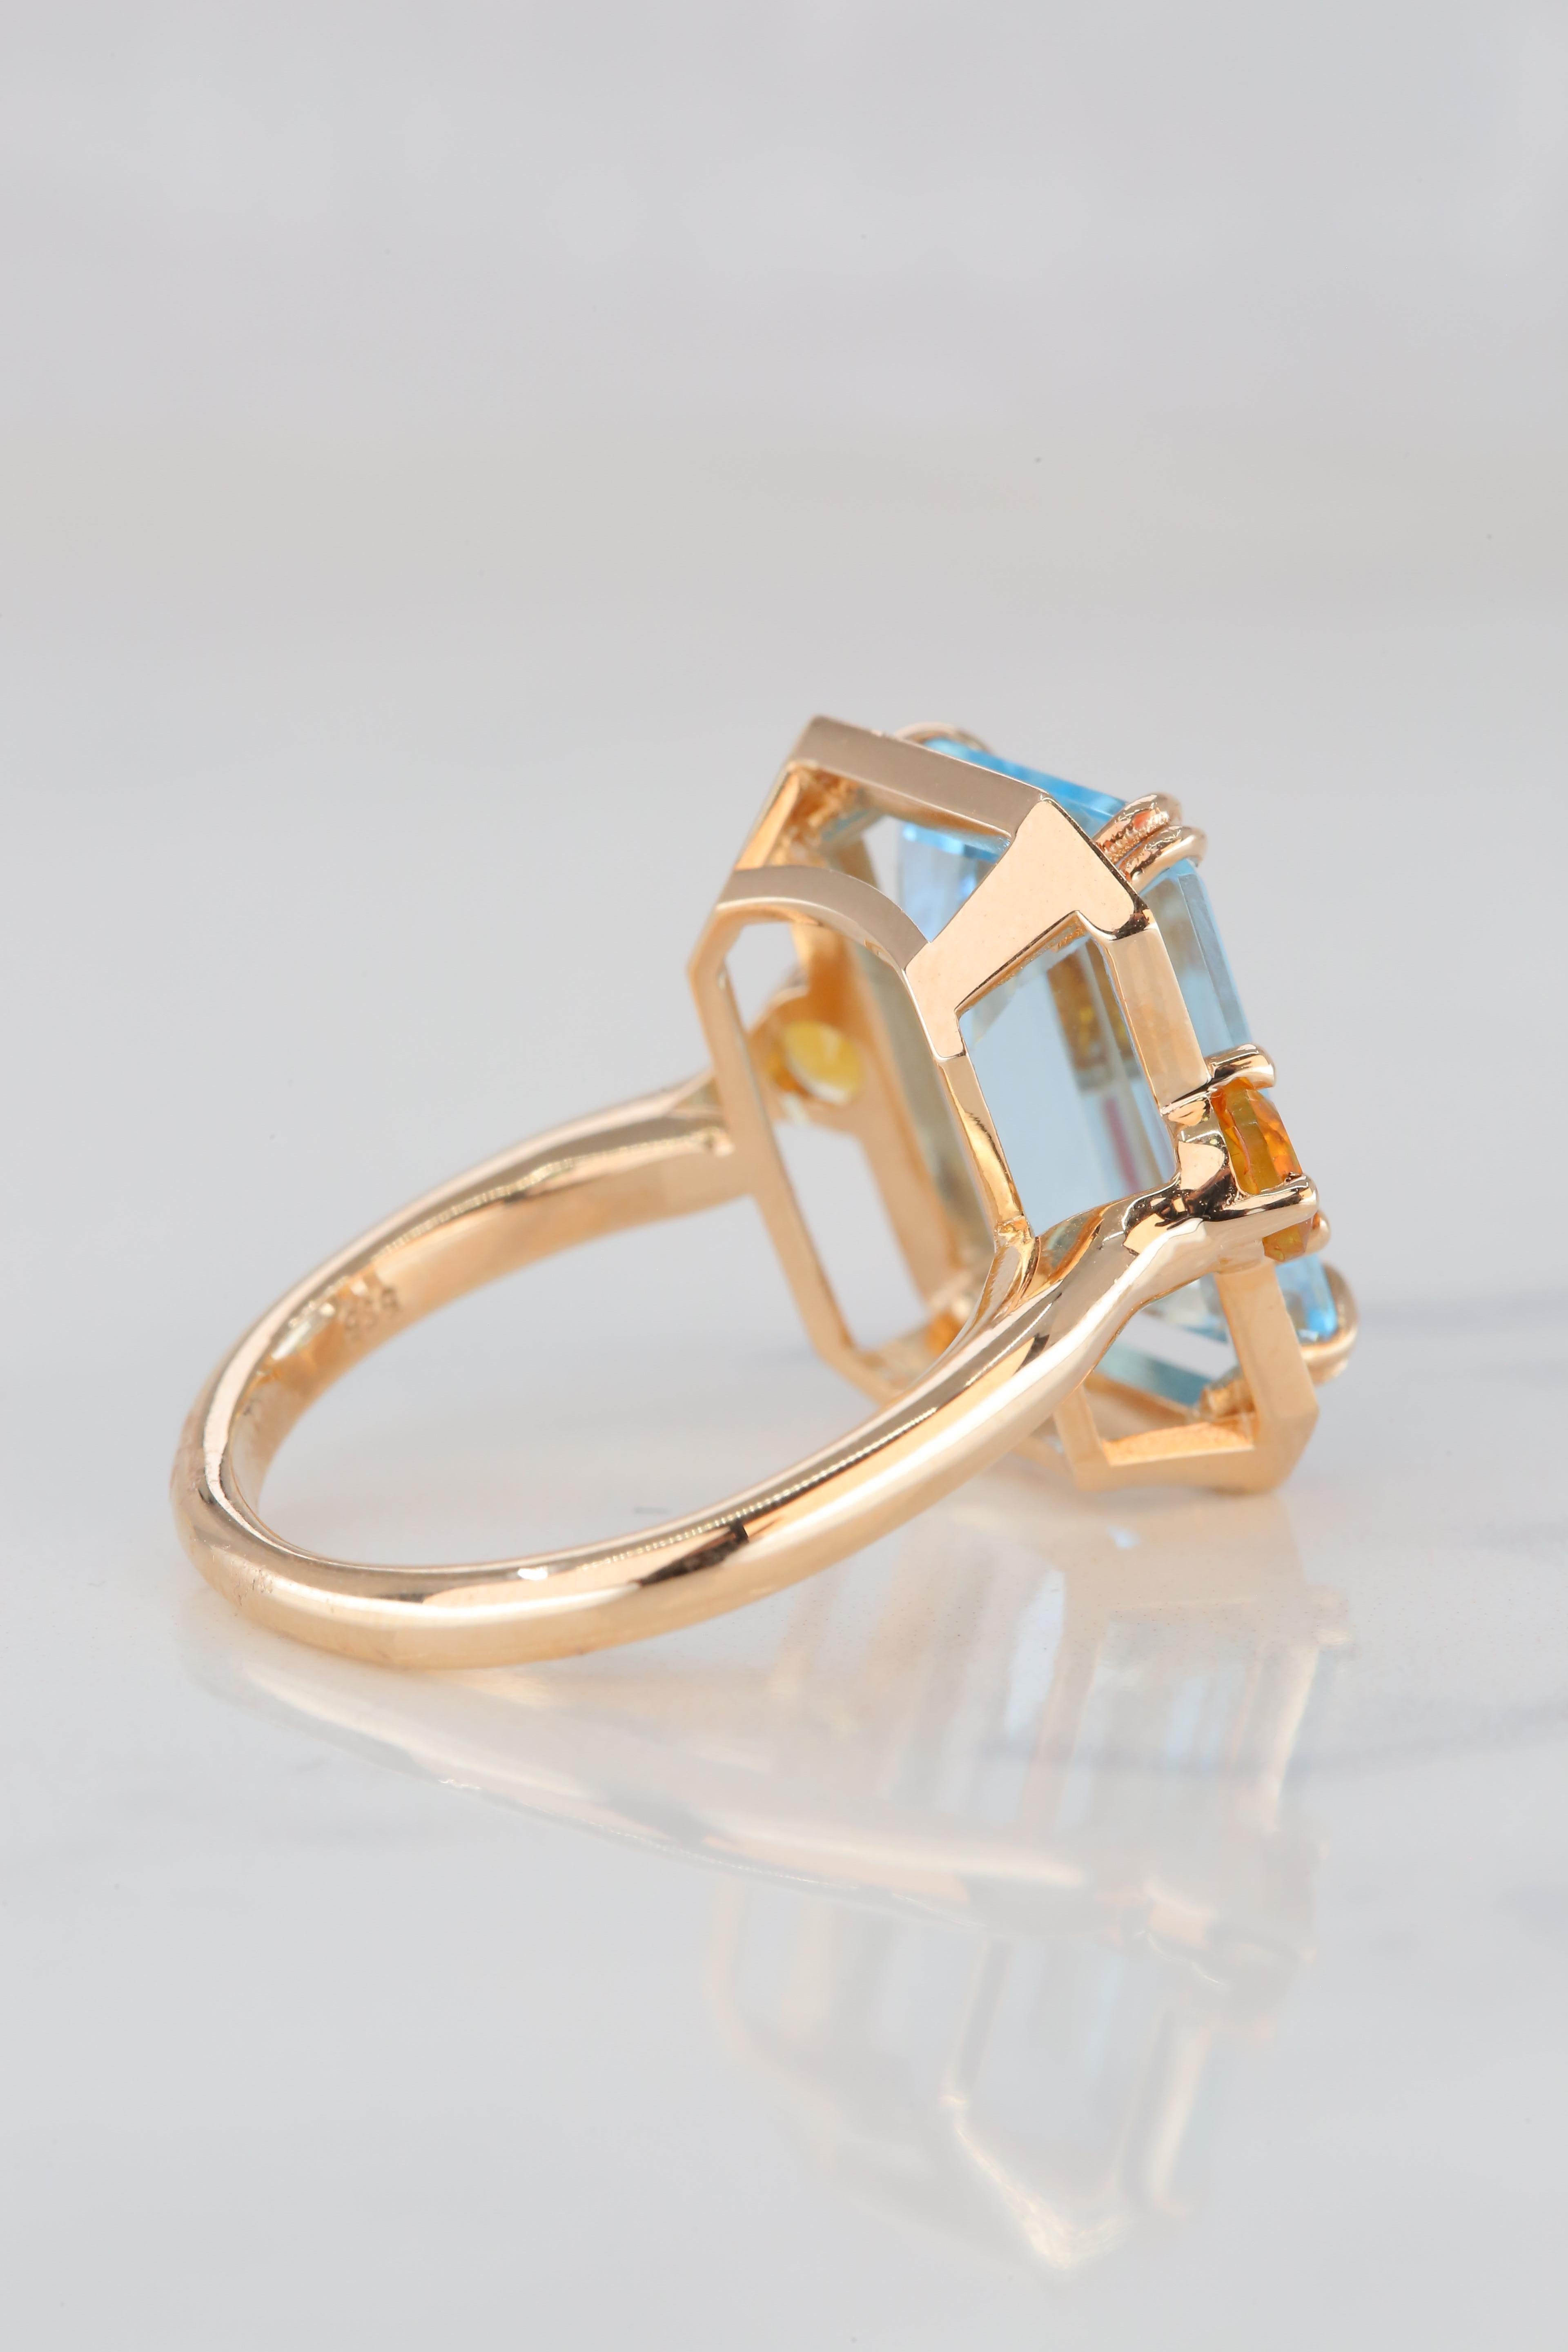 Art Deco Style Enameled Cocktail Ring with Sky Topaz and Citrine 7